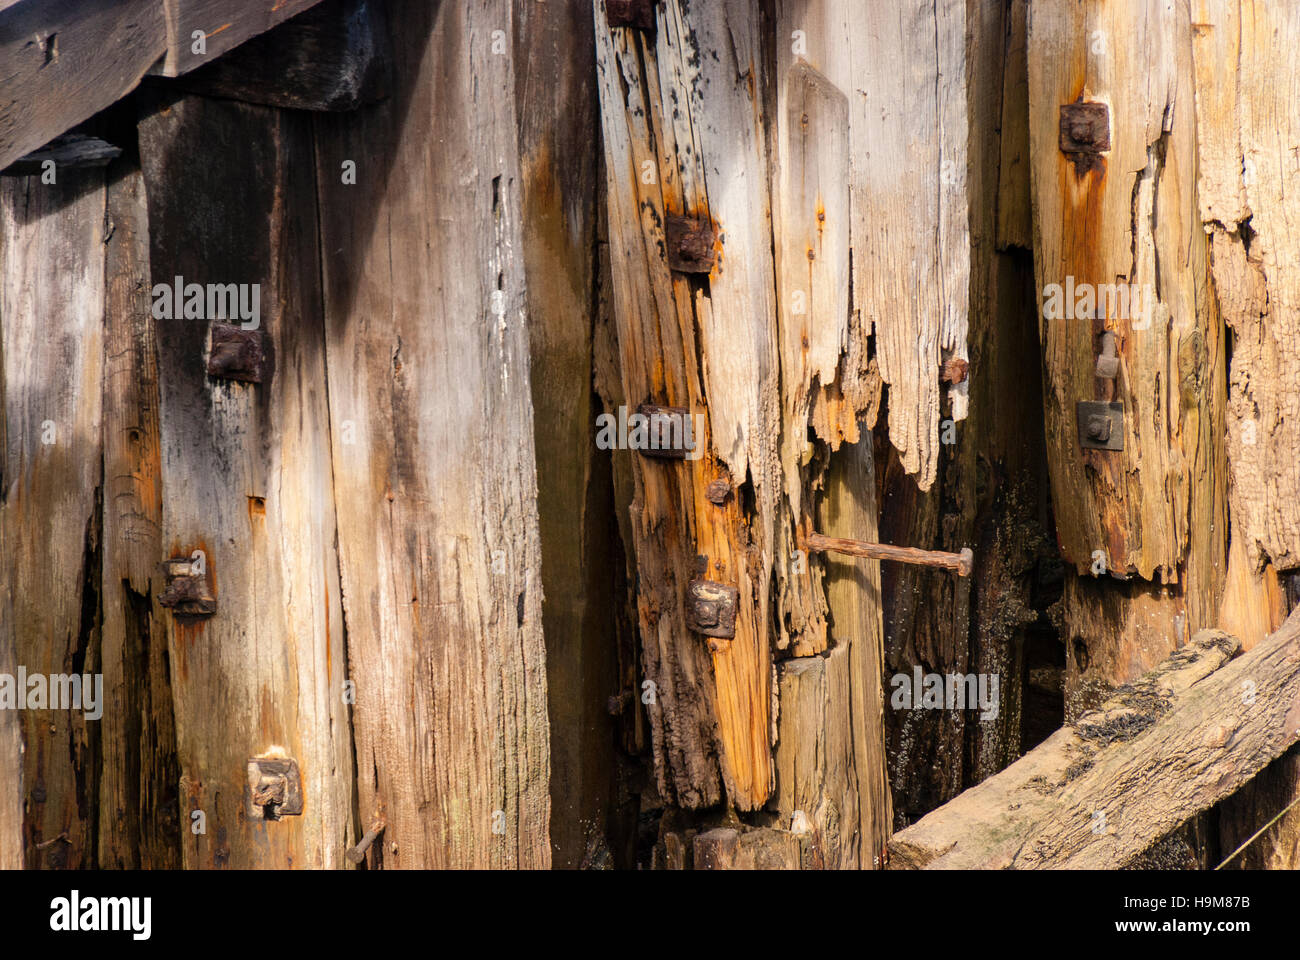 A decaying wooden pier close up background Stock Photo